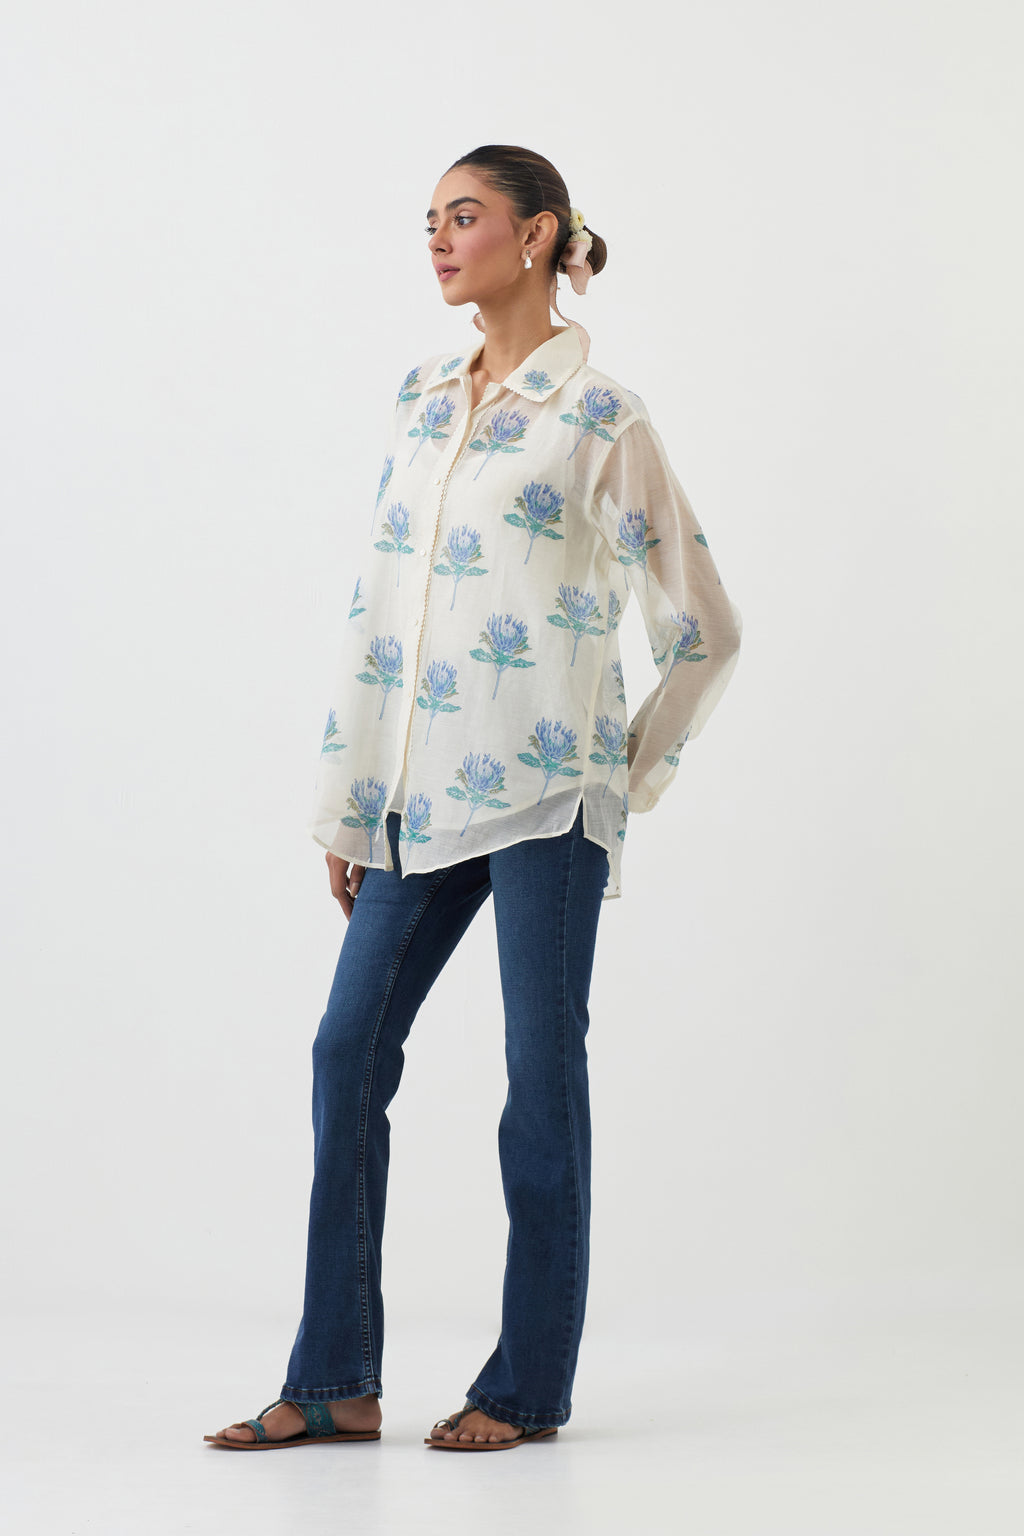 Off white cotton chanderi shirt with all-over blue floral hand block print and full sleeves.